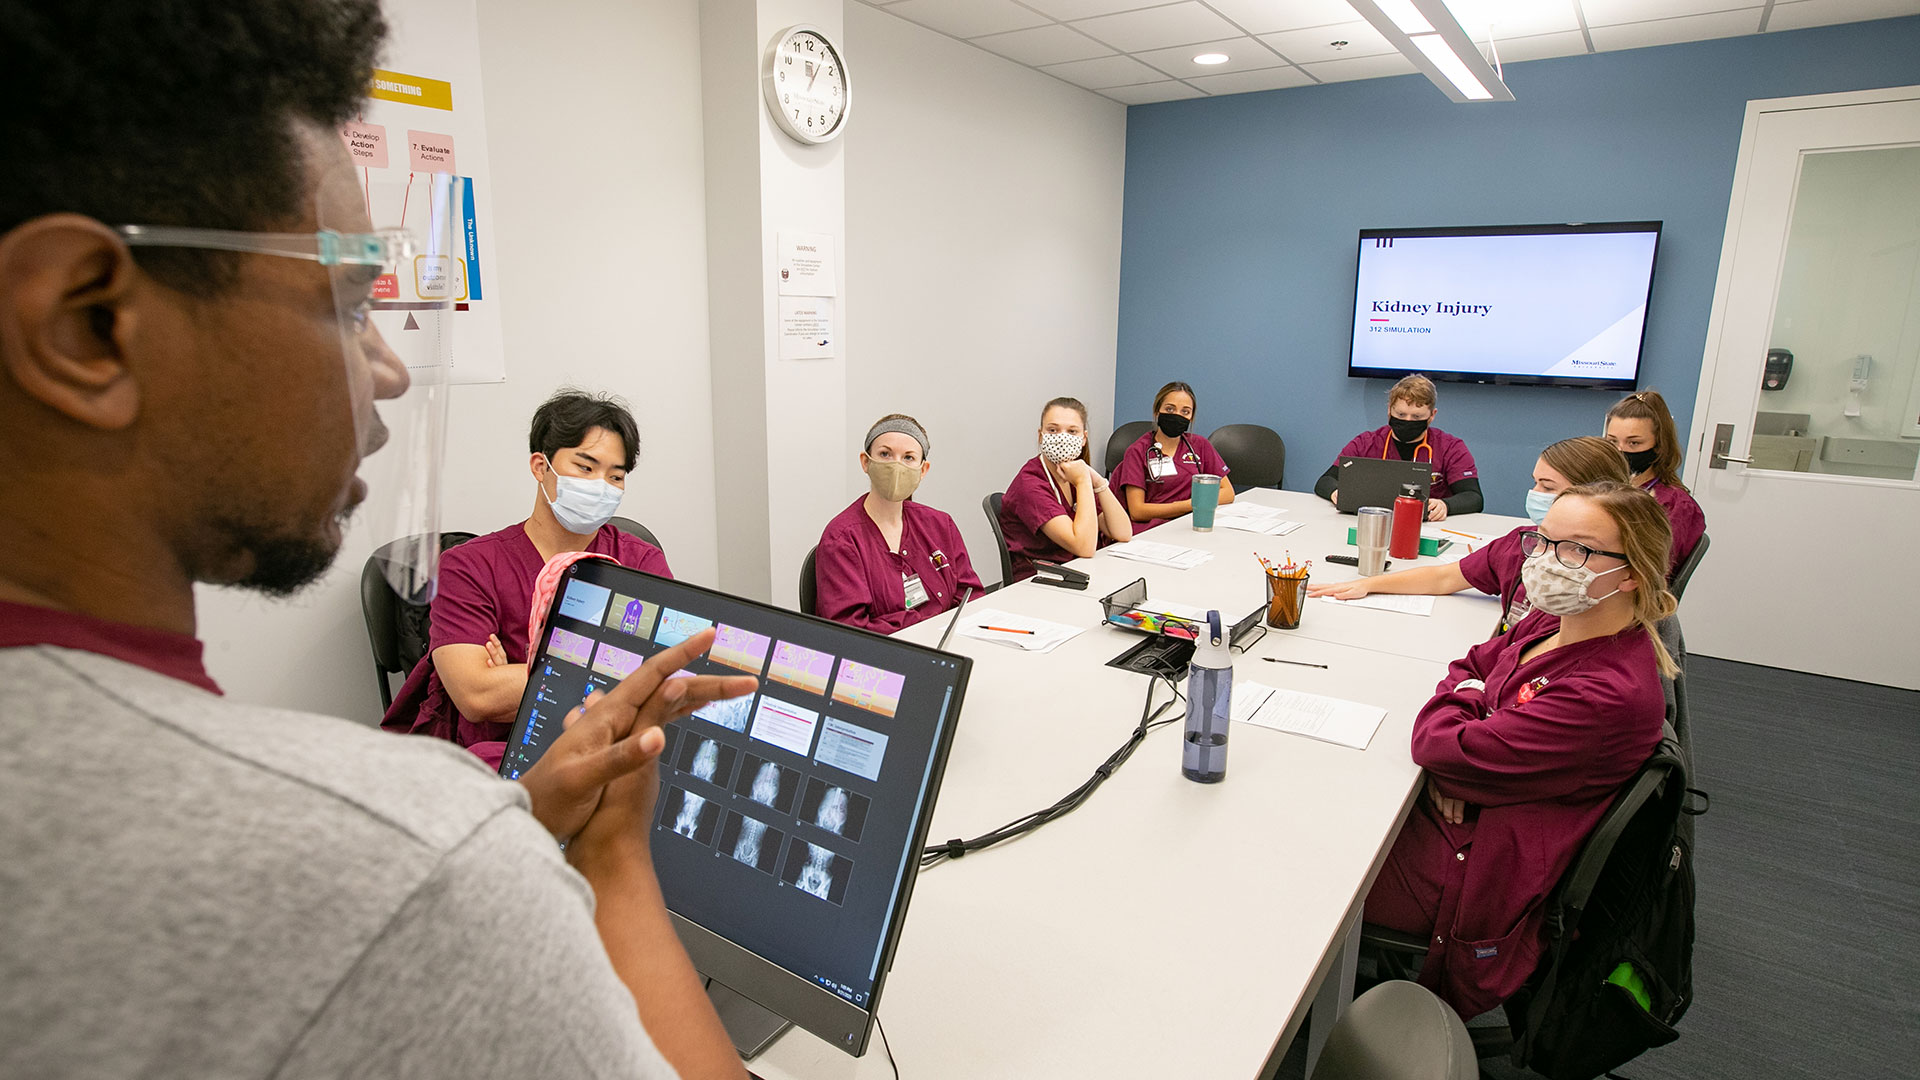 Nursing students learn about kidney injuries in the debrief room of the simulation lab in the O’Reilly Clinical Health Science Center